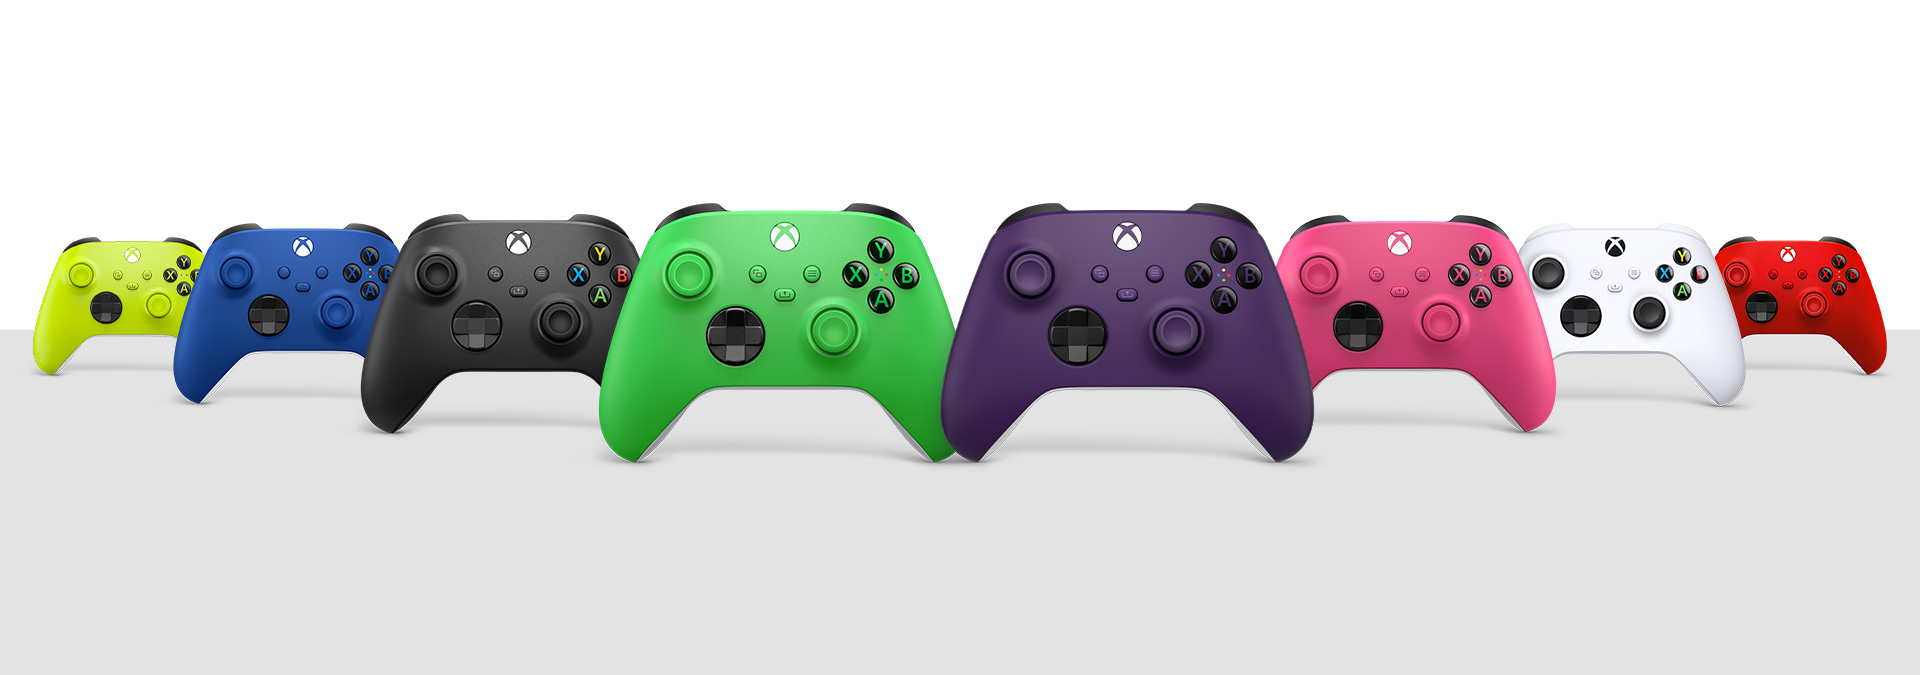 Xbox Wireless Controller Carbon Black, Robot White, Shock Blue, Pulse Red, Electric Volt, Deep Pink, Velocity Green and Astral Purple